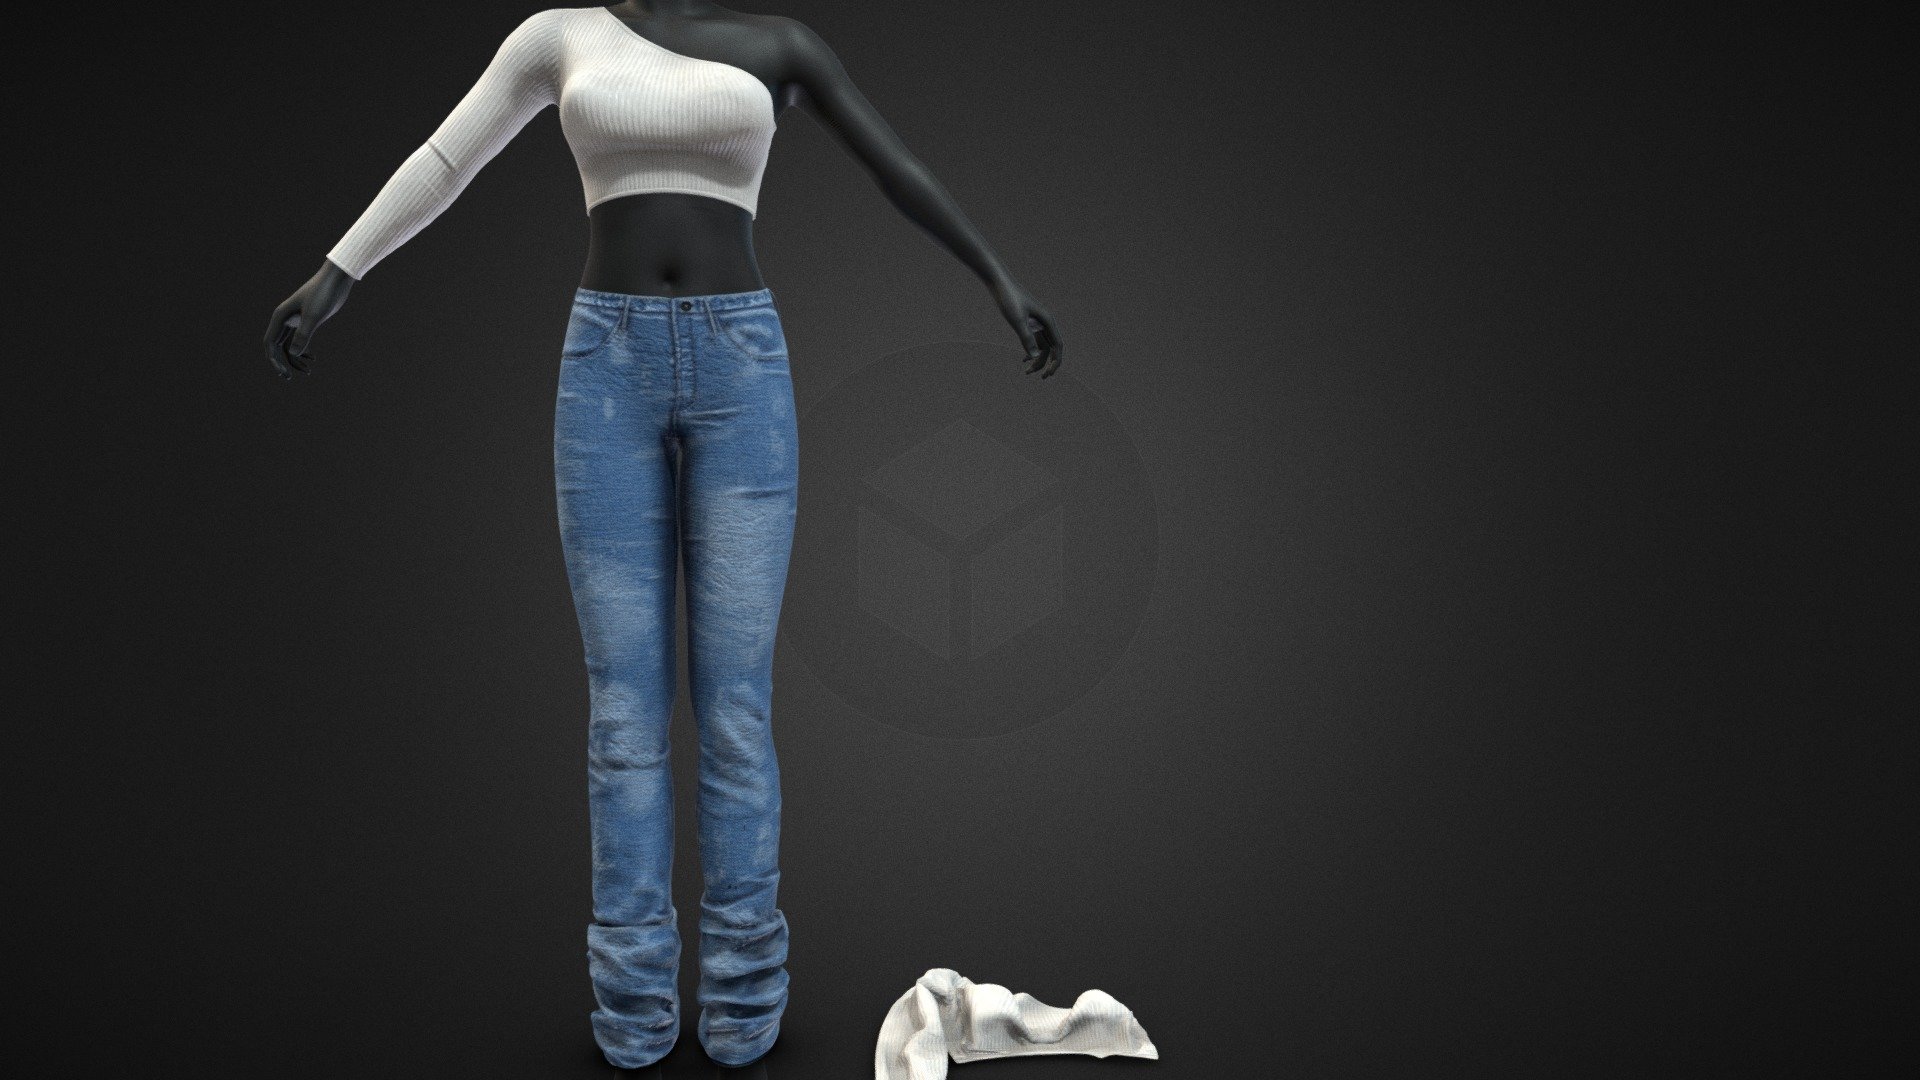 Female Clothing


Features





PBR 2048 x 2048 textures for Unity, Unreal and Vray




2 Material zones : w20 [Top] and w21 [Jeans]




Polycount for clothing is:







Top [6853 faces  - 13706 tris - 6987 verts]




Jeans  [15742 faces  - 31432 tris - 15916 verts]







System unit is cm for Maya




Real world scale



Textures





General Textures [BaseColor-Metallic-Height-AO-Normal-Roughness] _ .png 2048 x 2048_




Textures 2K .png for Unity, Unreal and Vray



Files





Maya file [Wear_20-21.mb] scene with clothing on manequin and on hanger




zBrush file [Wear_20-21_hp.zpr] scene with high poly model




fbx file [Wear_20-21_onManequin.fbx] model on manequin for preview




Substance Painter file [Wear_21_sp.spp] scene with building the textures for Top




Substance Painter file [Wear_20_sp.spp] scene with building the textures for jeans




[onManequin.zip] the models on manequin in .obj .fbx .dae formats




[onHanger.zip] the model [only Top] on hanger in .obj .fbx .dae formats


 - Female Clothing - Buy Royalty Free 3D model by Paris (@AAAAAAAAAbla) 3d model